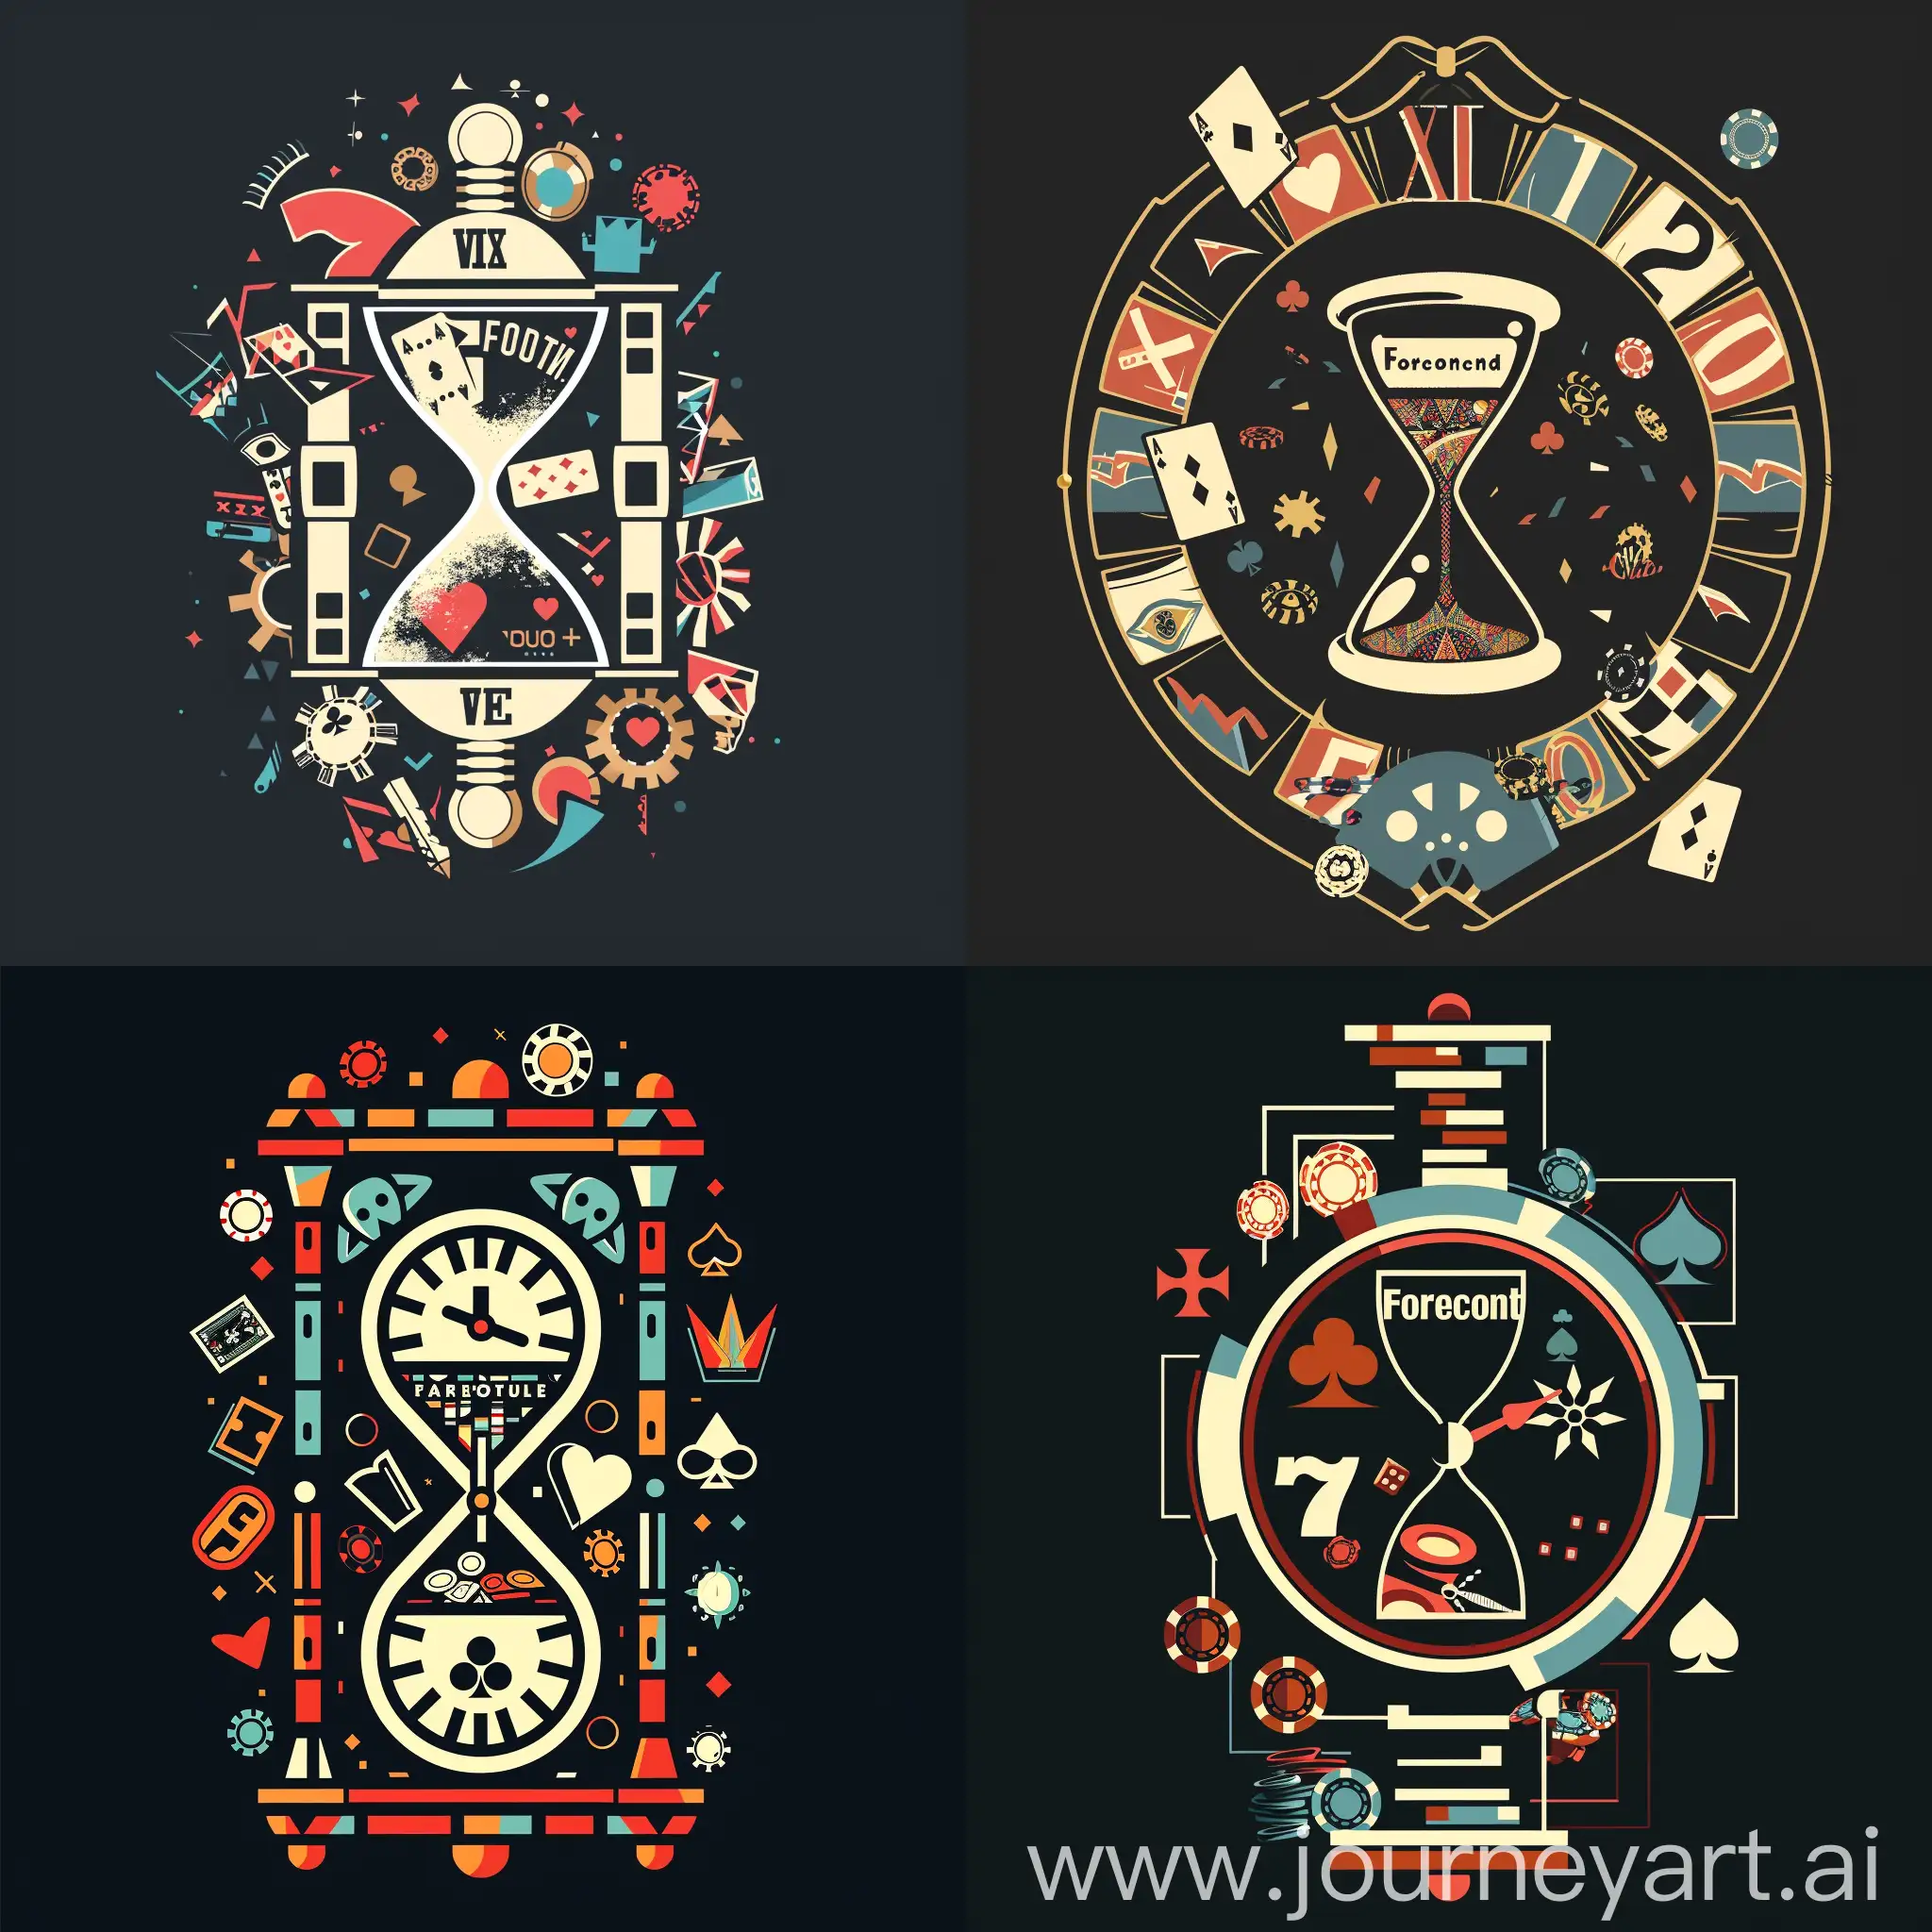 Clock or hourglass design with "Forgotten" inside, featuring gaming symbols and a contrasting color palette.